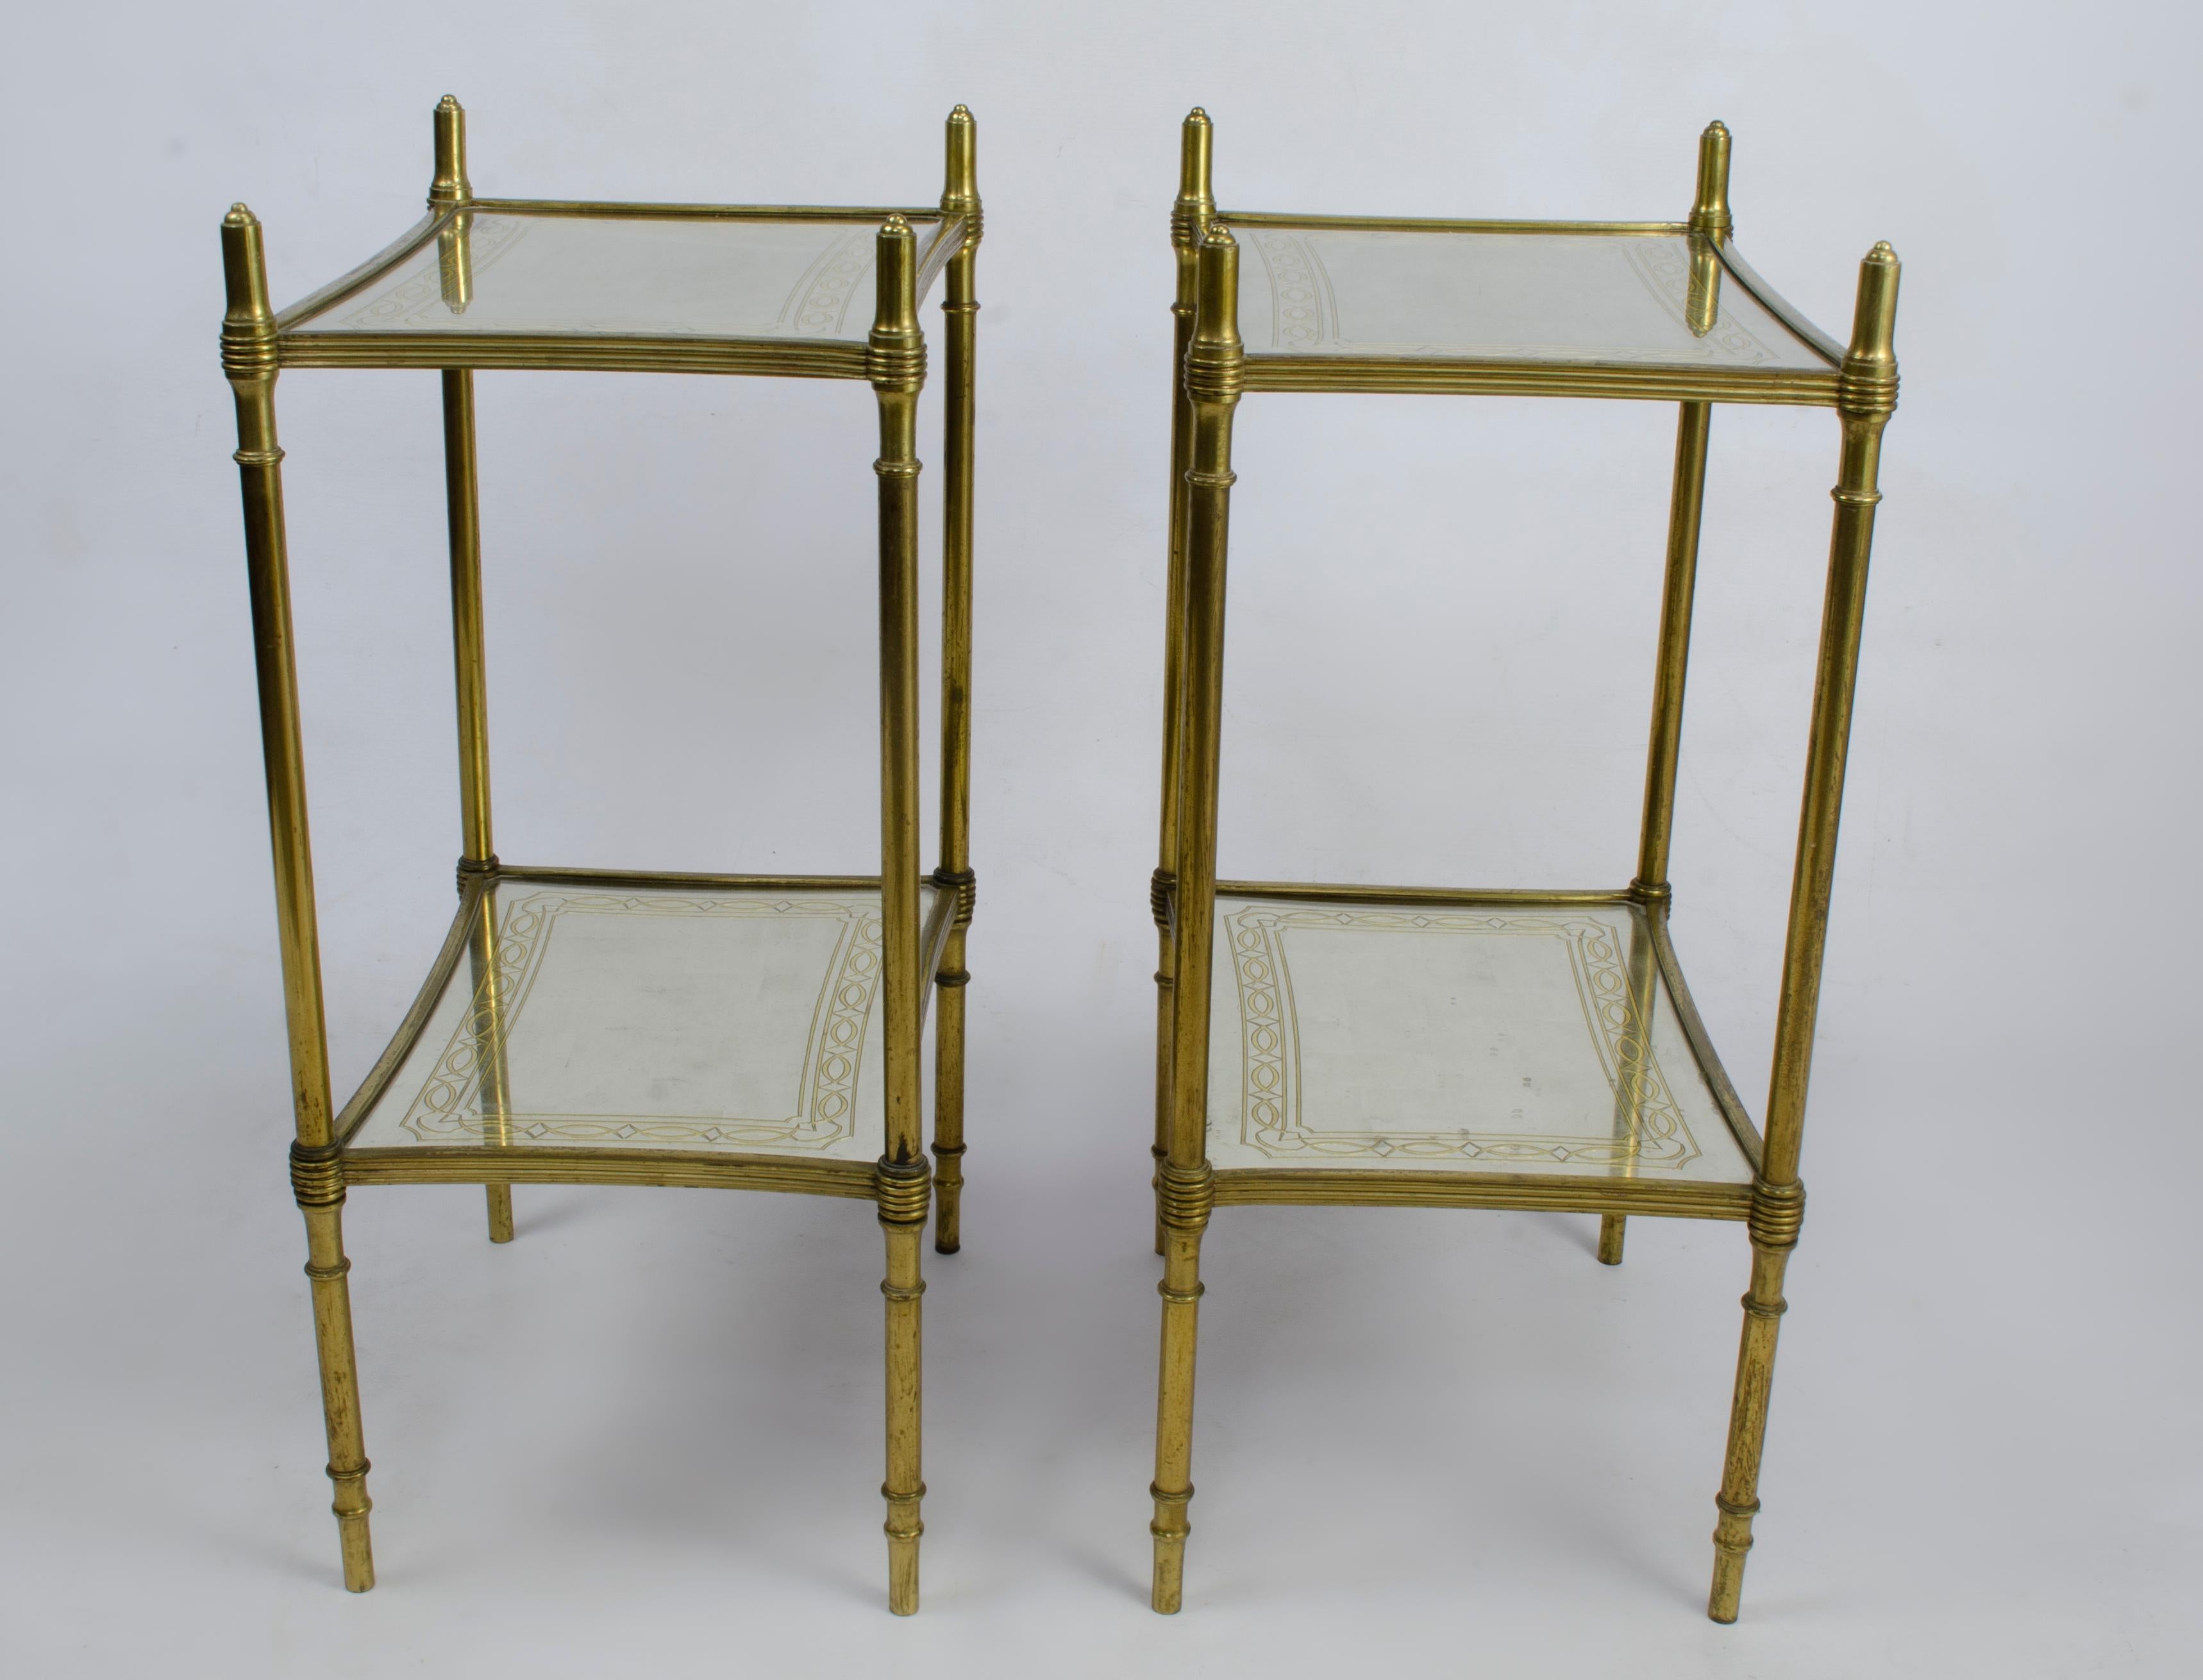 Pair of Gilt-Bronze and Églomisé Two Tiers Side Tables, Probably Maison Jansen In Good Condition For Sale In Ciudad Autónoma Buenos Aires, AR